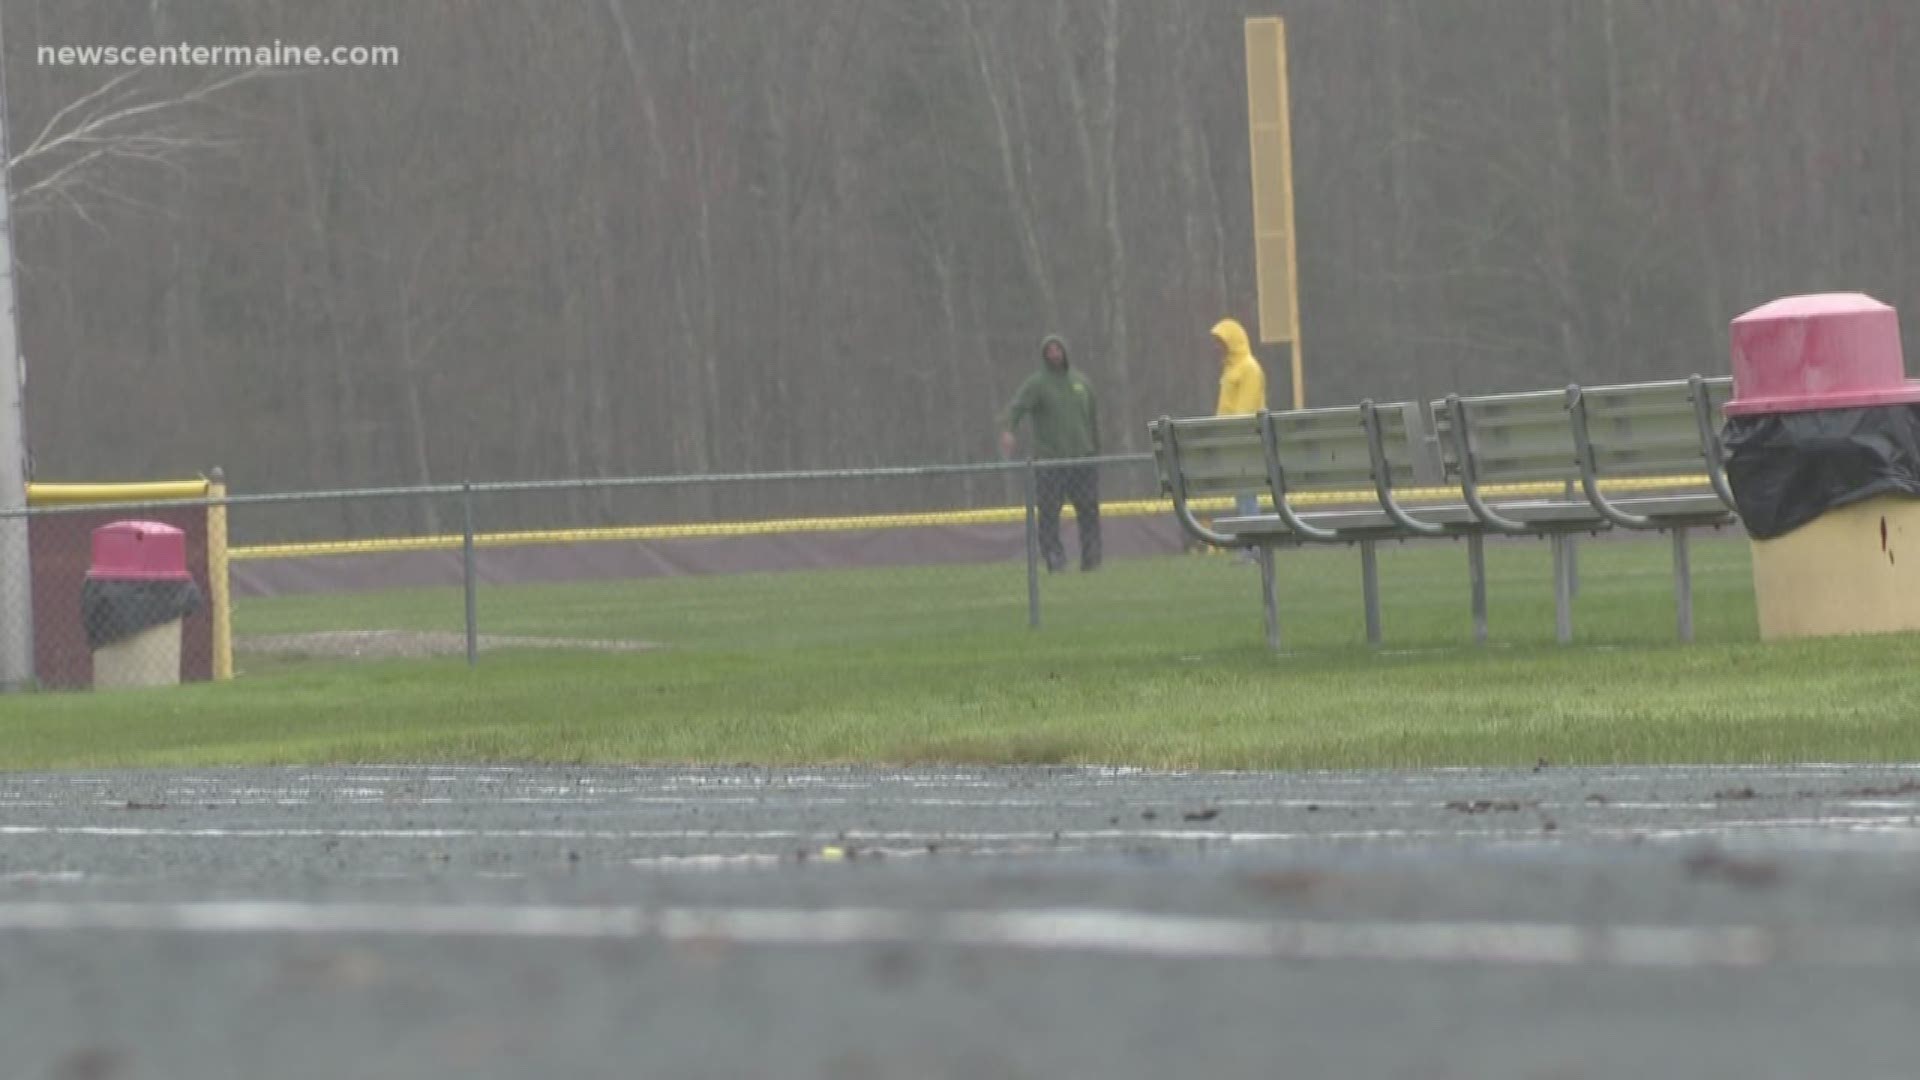 Excessive rain this spring is affecting high school sports fields -- and families' schedules.